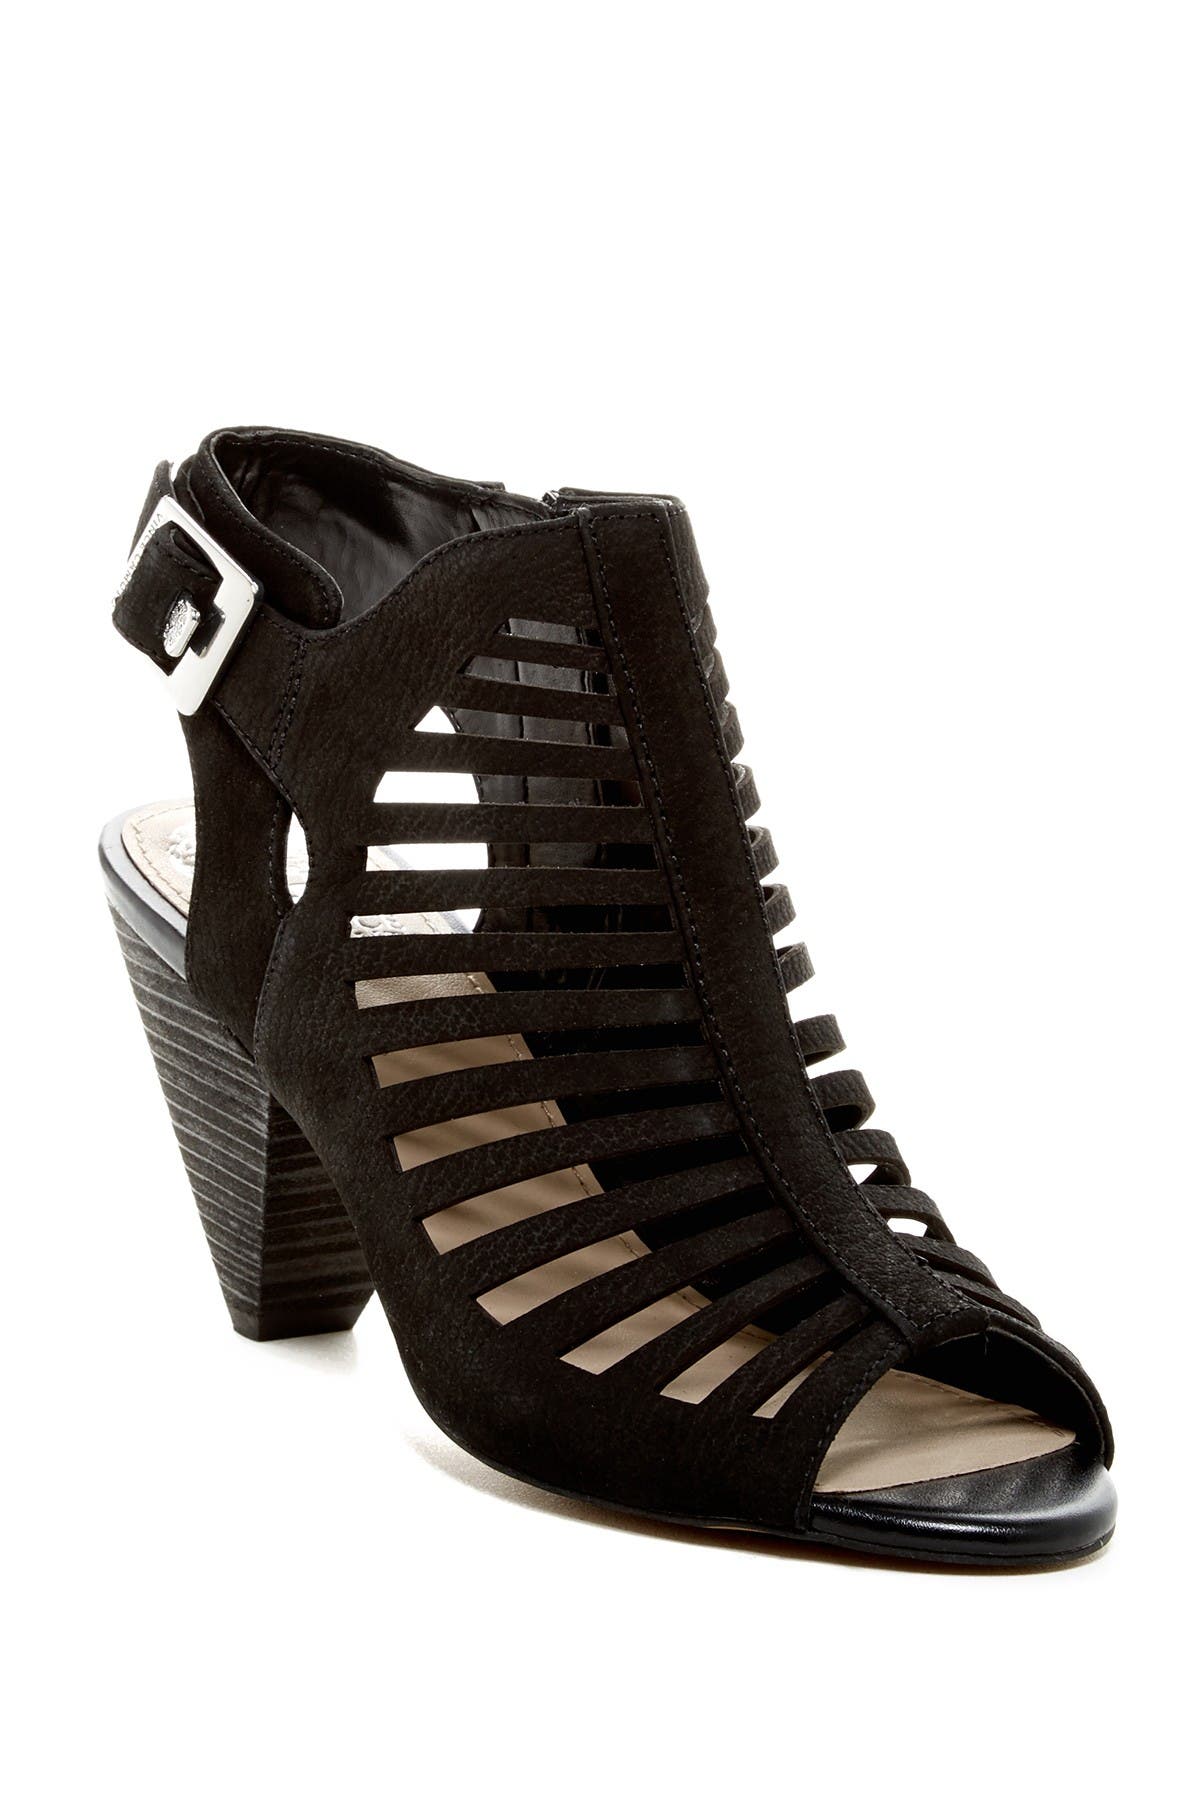 Vince Camuto | Eliana Caged Leather 